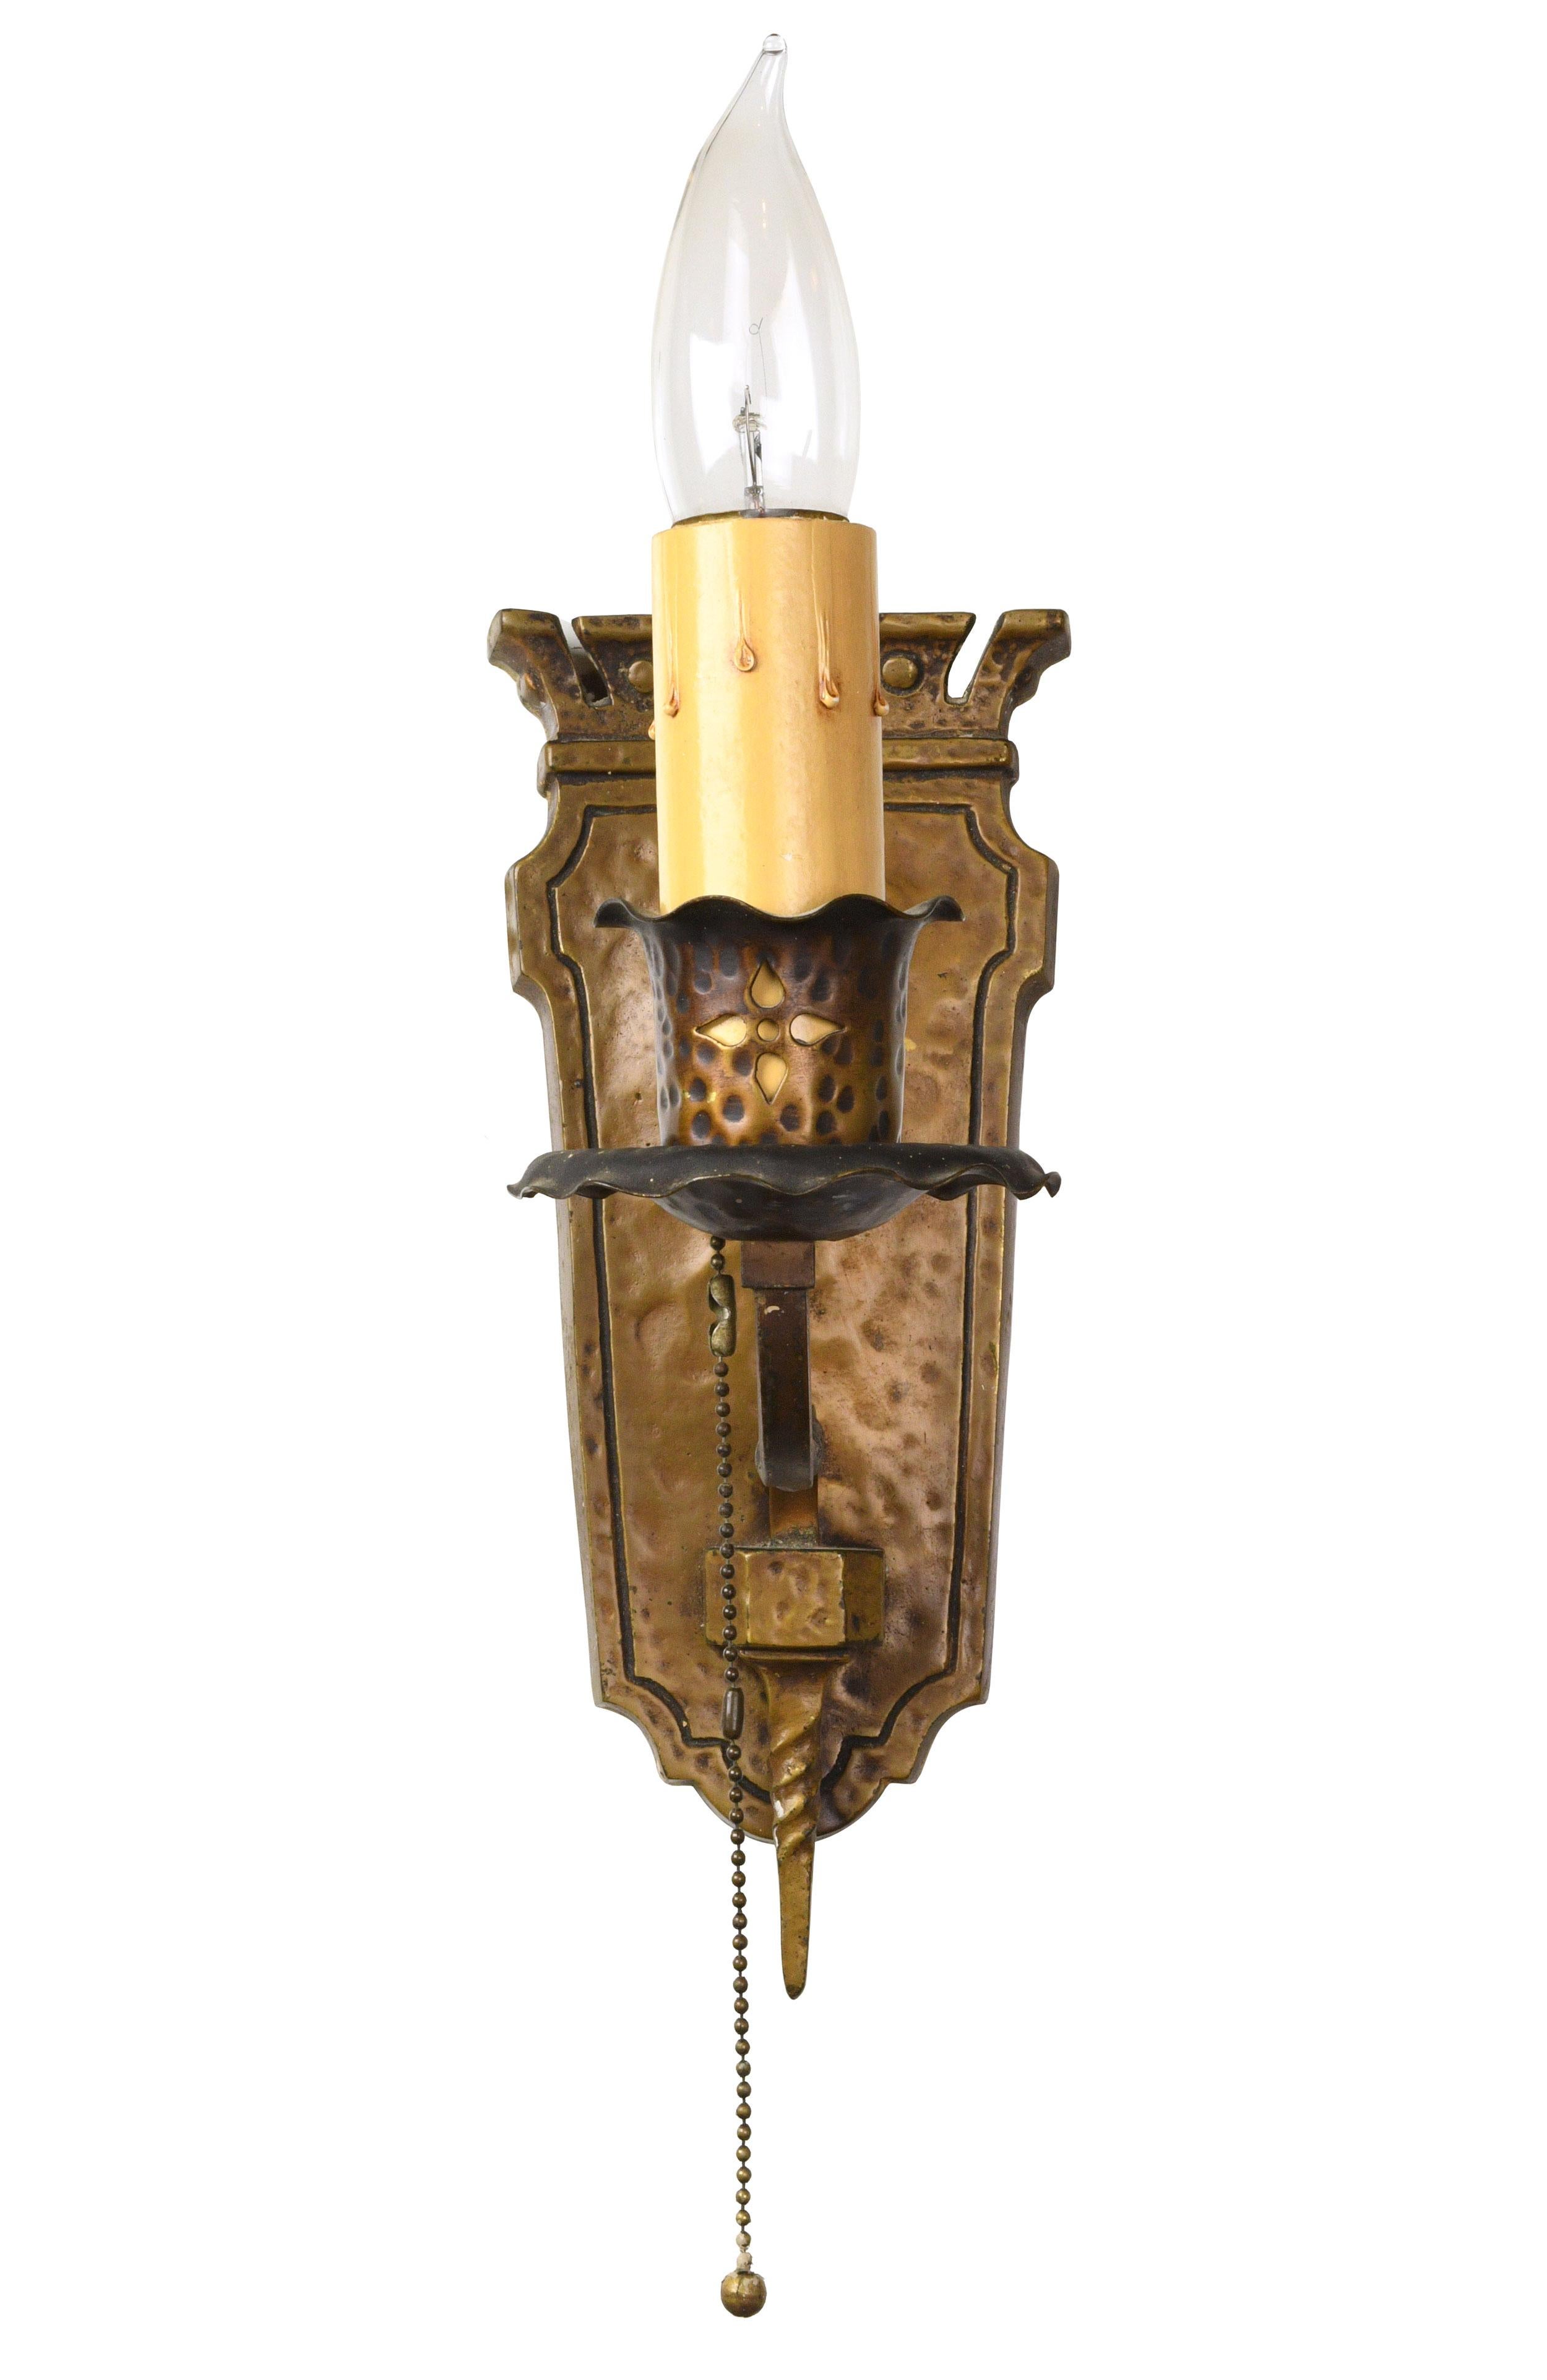 Beautiful, heavy cast brass Tudor sconce with hammered detailing throughout. The twisted metal arm and pronounced finial add a touch of elegance to this richly textured piece.

seven matching sconces available; sold separately.

circa